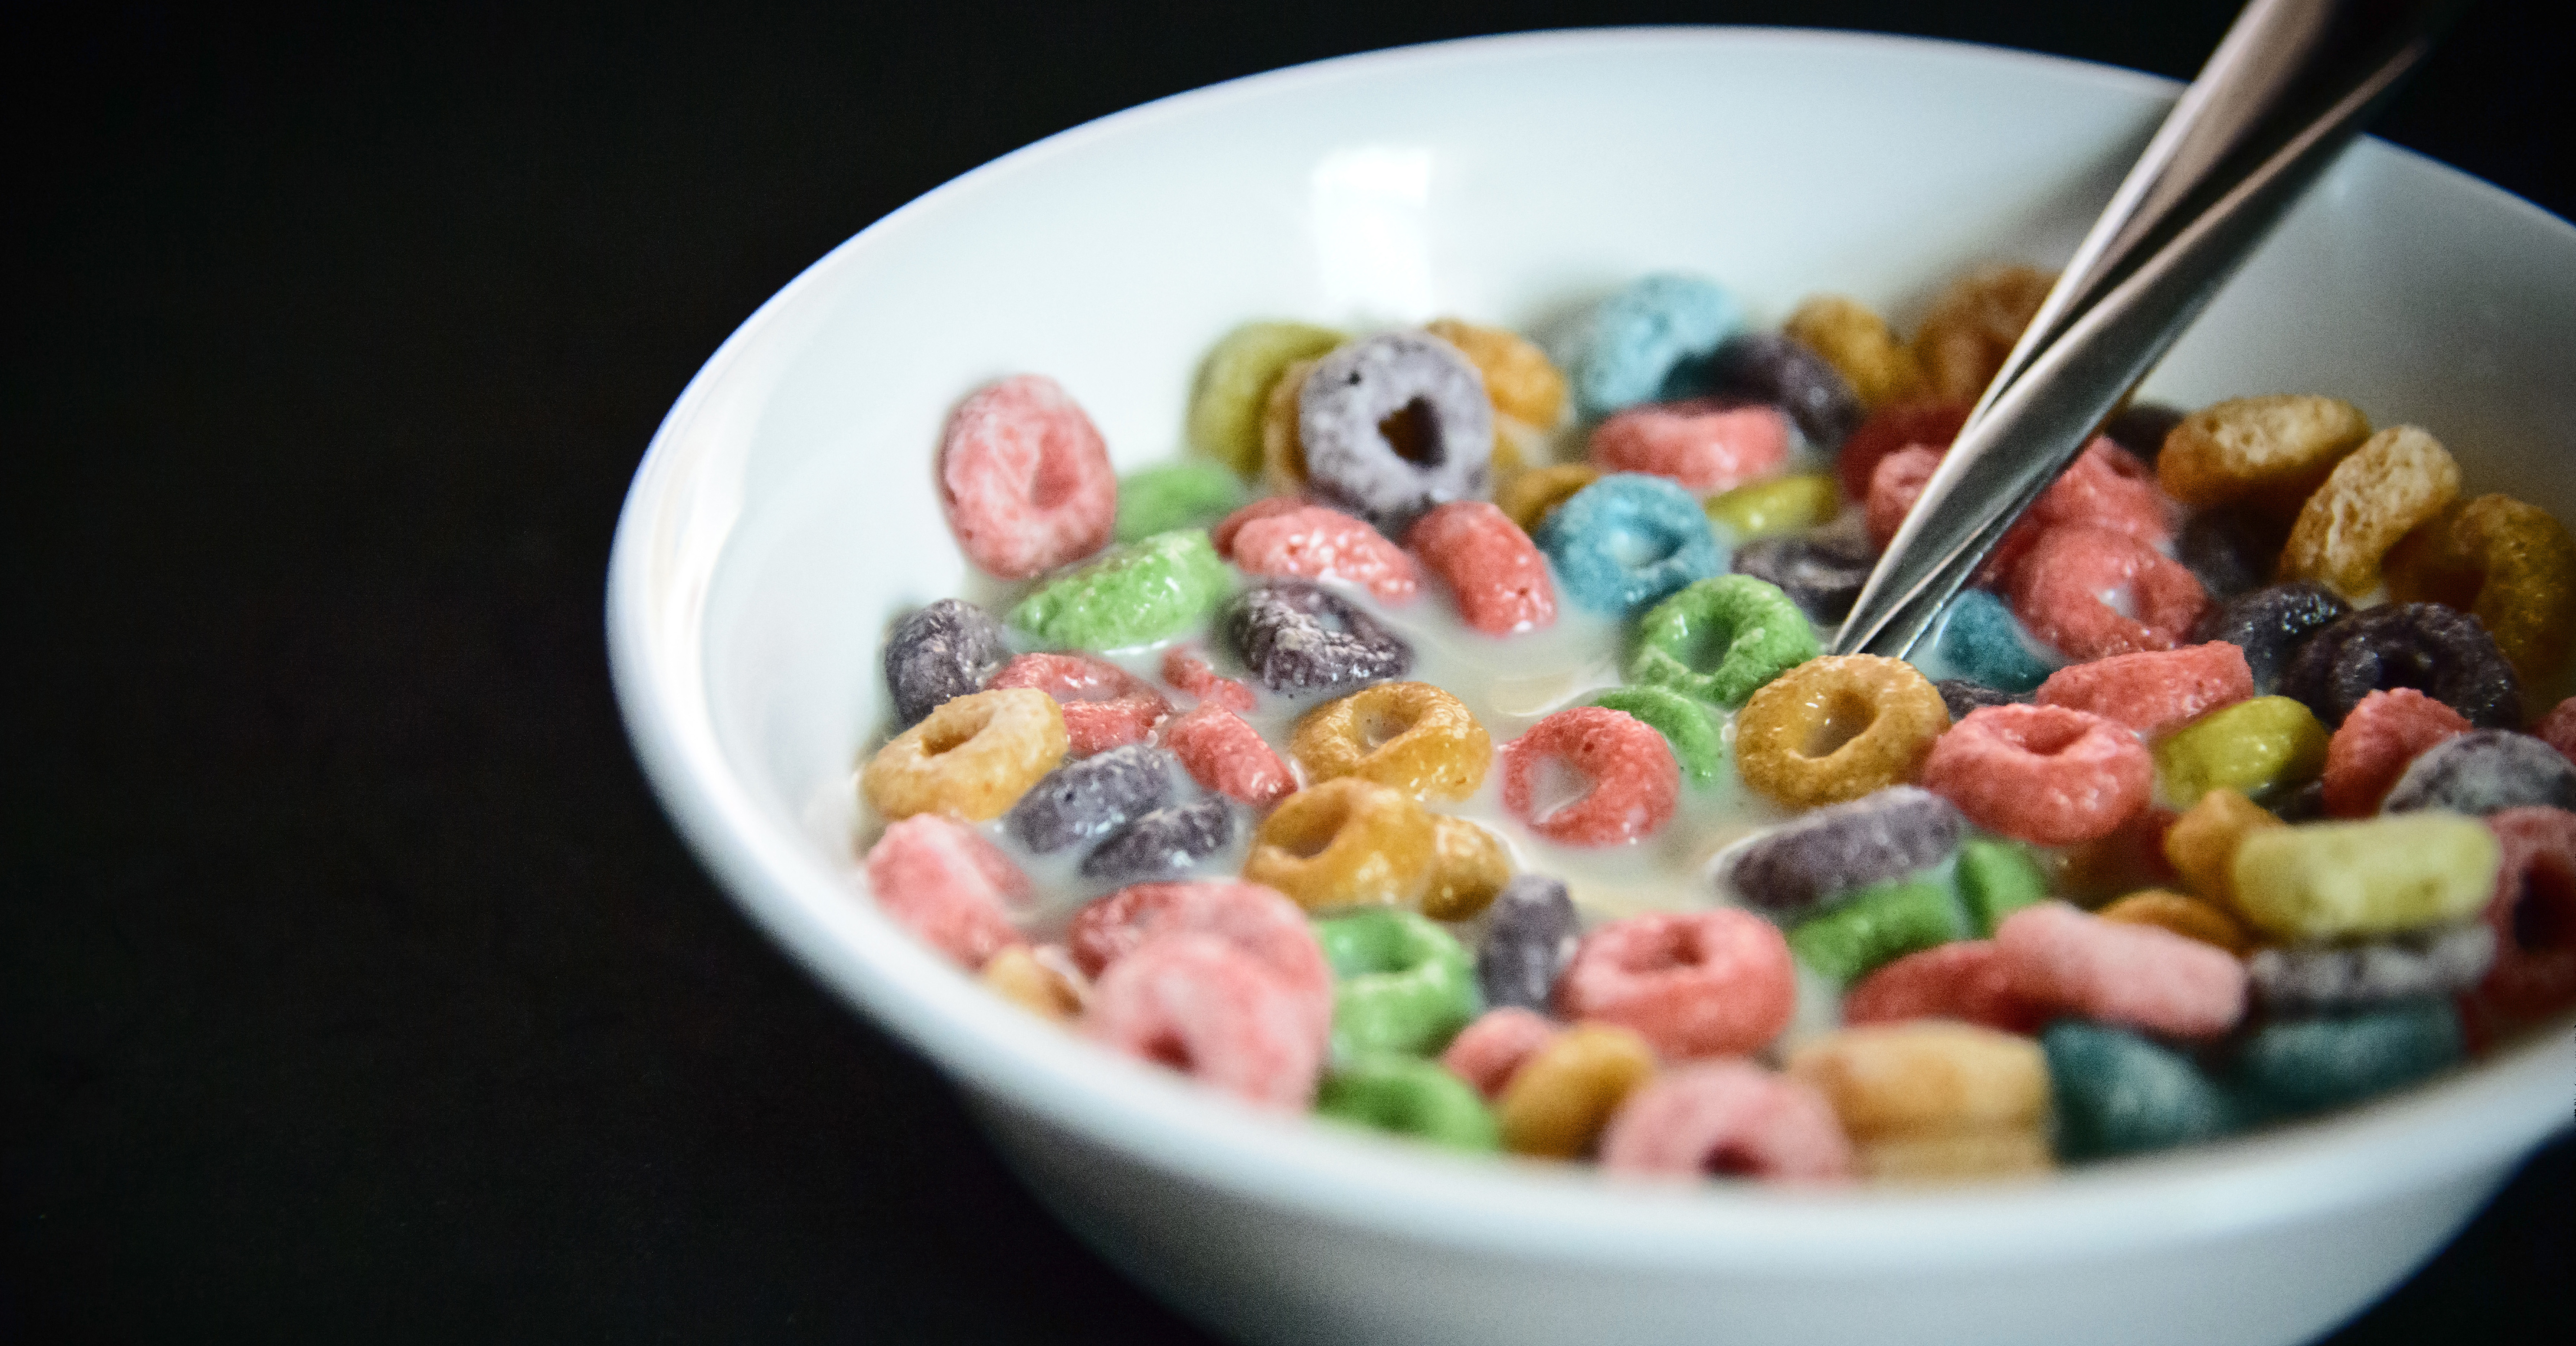 These Popular Breakfast Cereals Have More Sugar Than A Scoop Of Ice